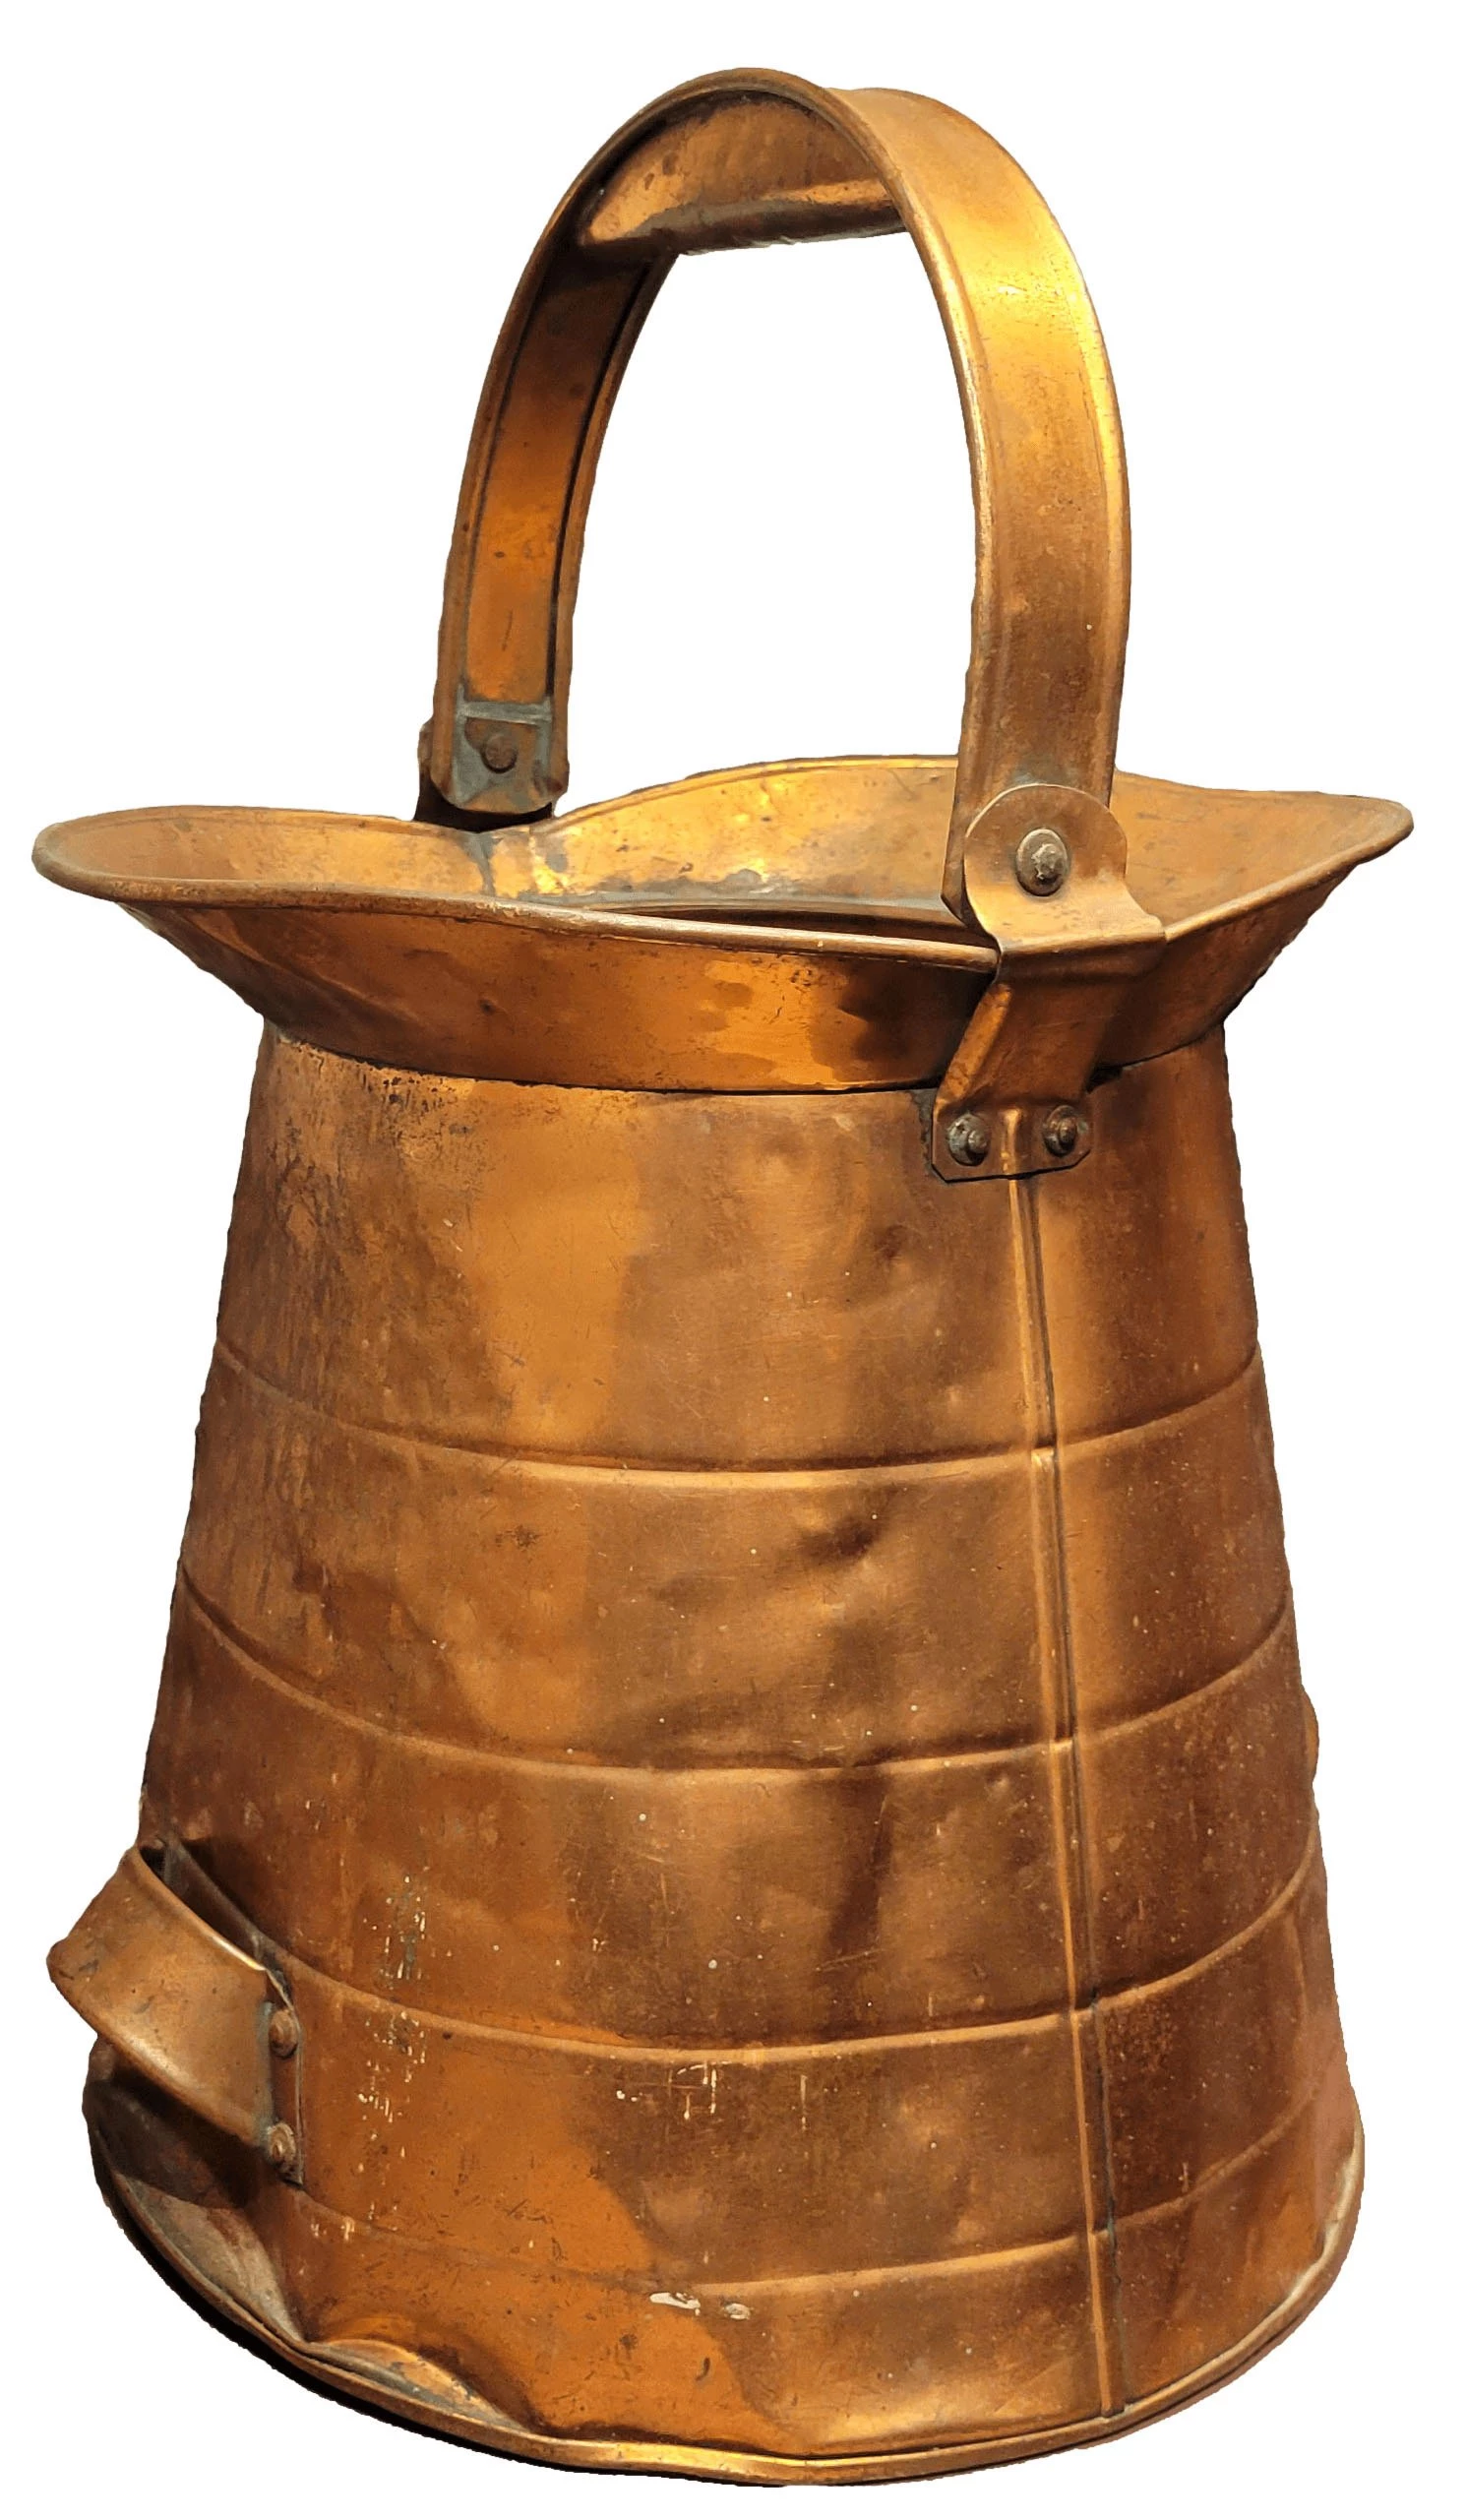 Photo of a copper bucket that is slightly dented, with a handle at the top and small handle at the bottom.